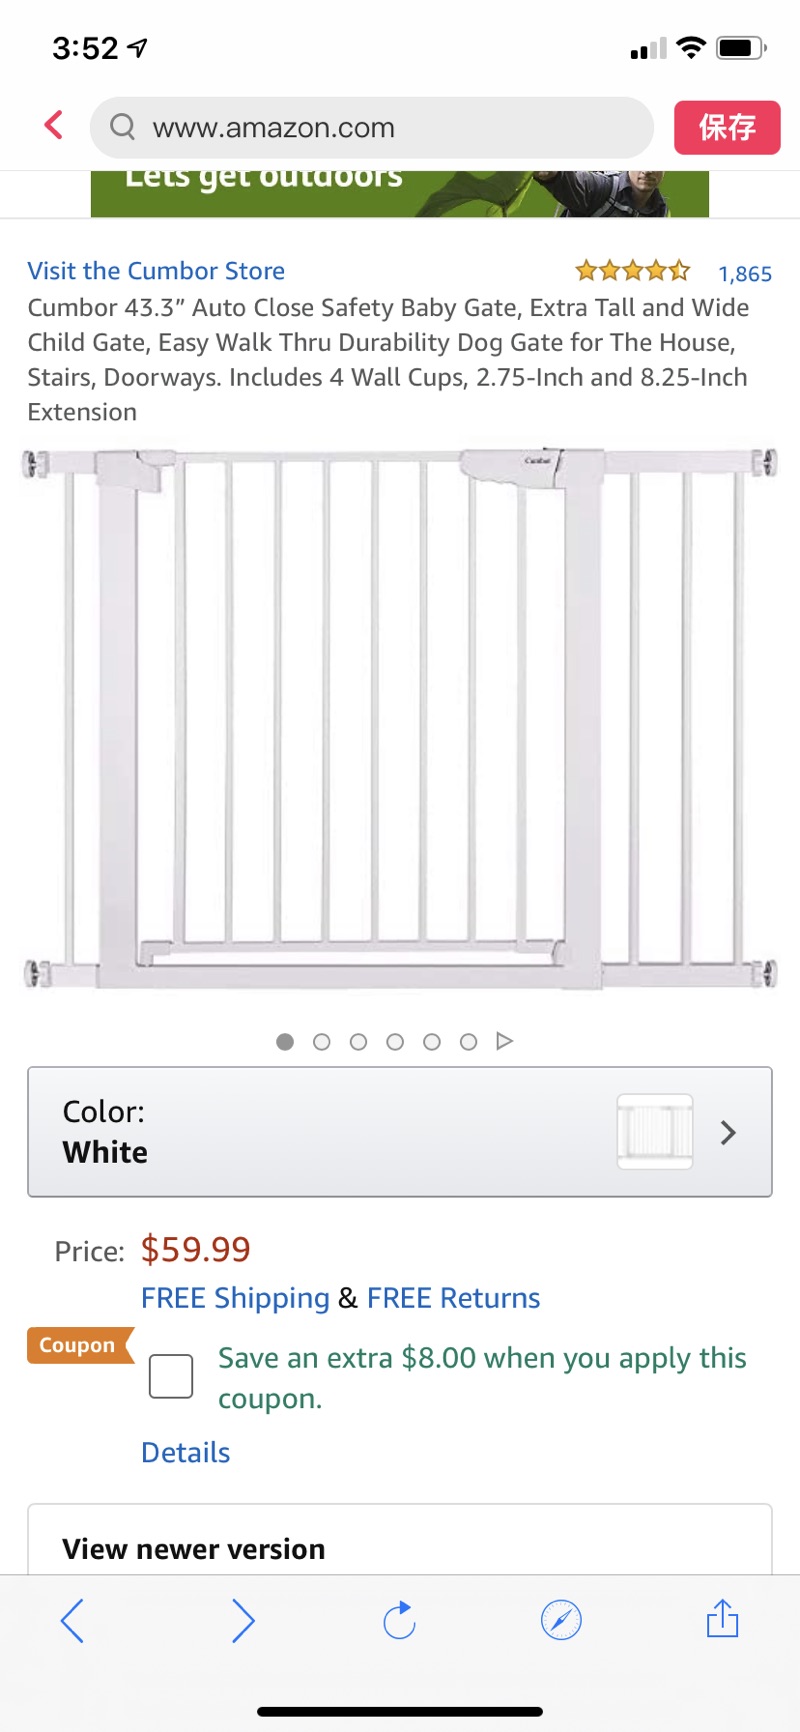 Amazon.com : Cumbor 43.3” Auto Close Safety Baby Gate, Extra Tall and Wide Child Gate, Includes 4 Wall Cups, 2.75-Inch and 8.25-Inch Extension宝宝安全门